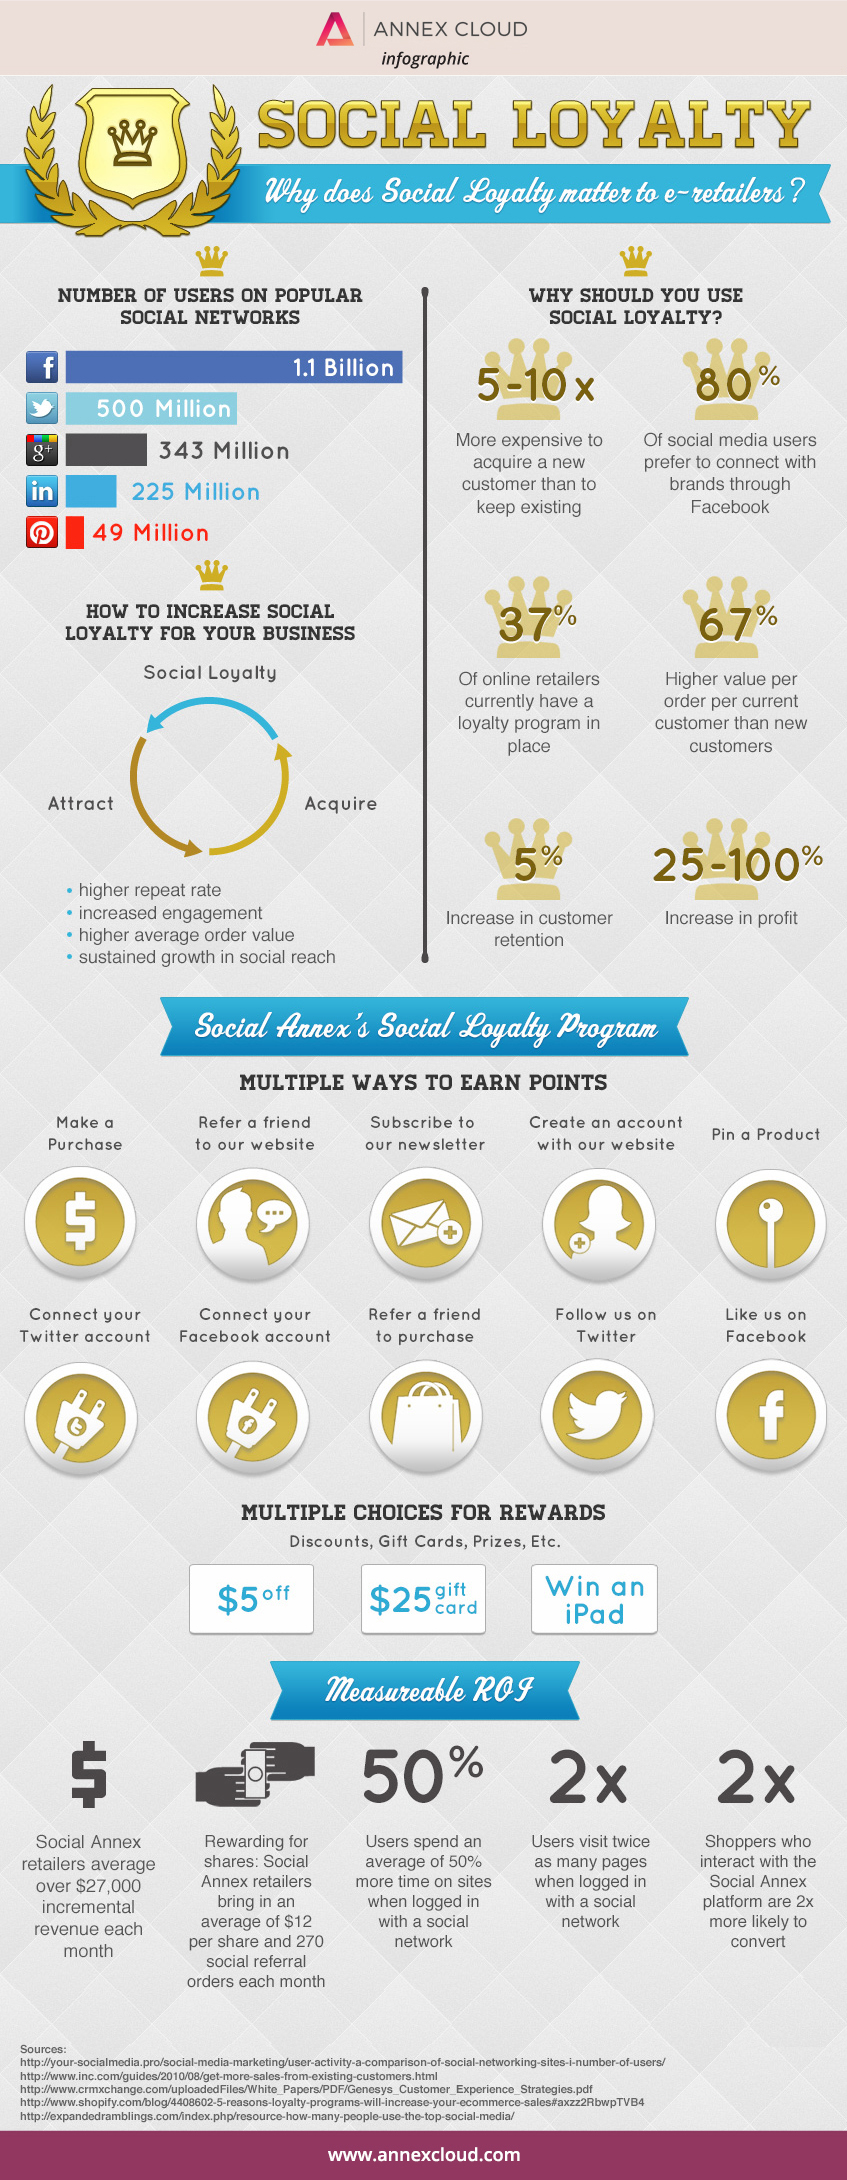 SOCIAL LOYALTY INFOGRAPHIC